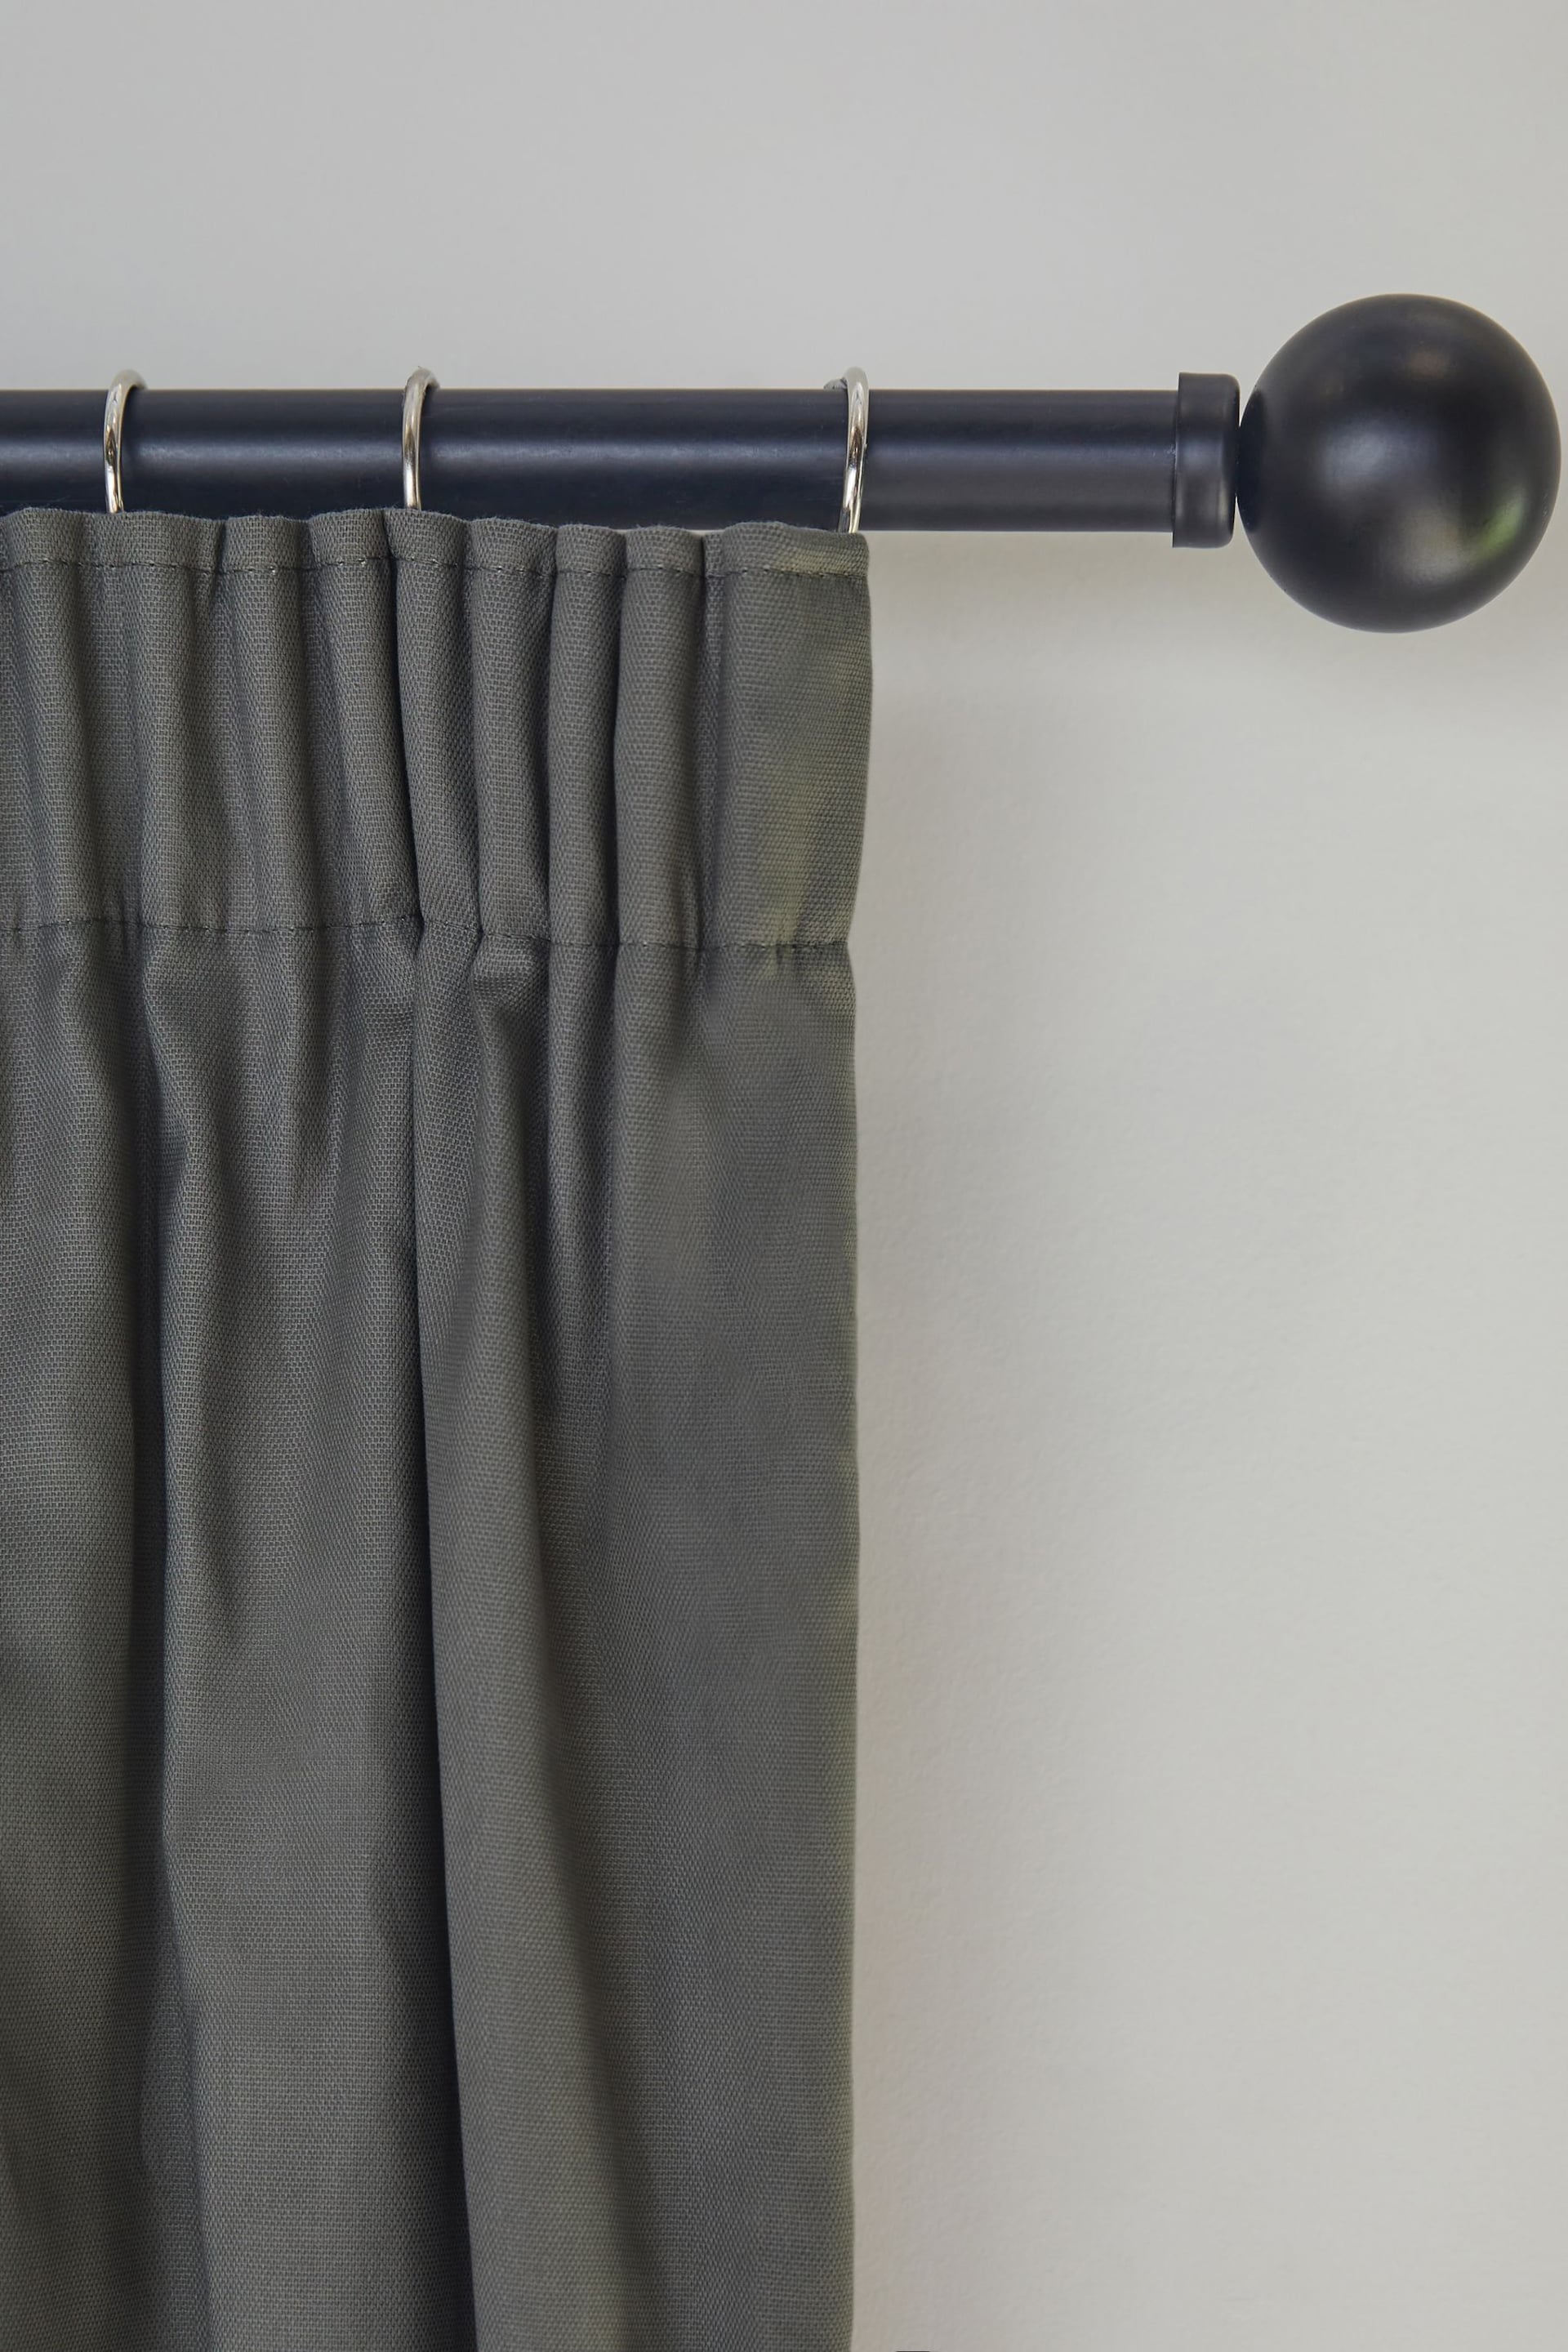 Charcoal Grey Cotton Lined Pencil Pleat Curtains - Image 6 of 7